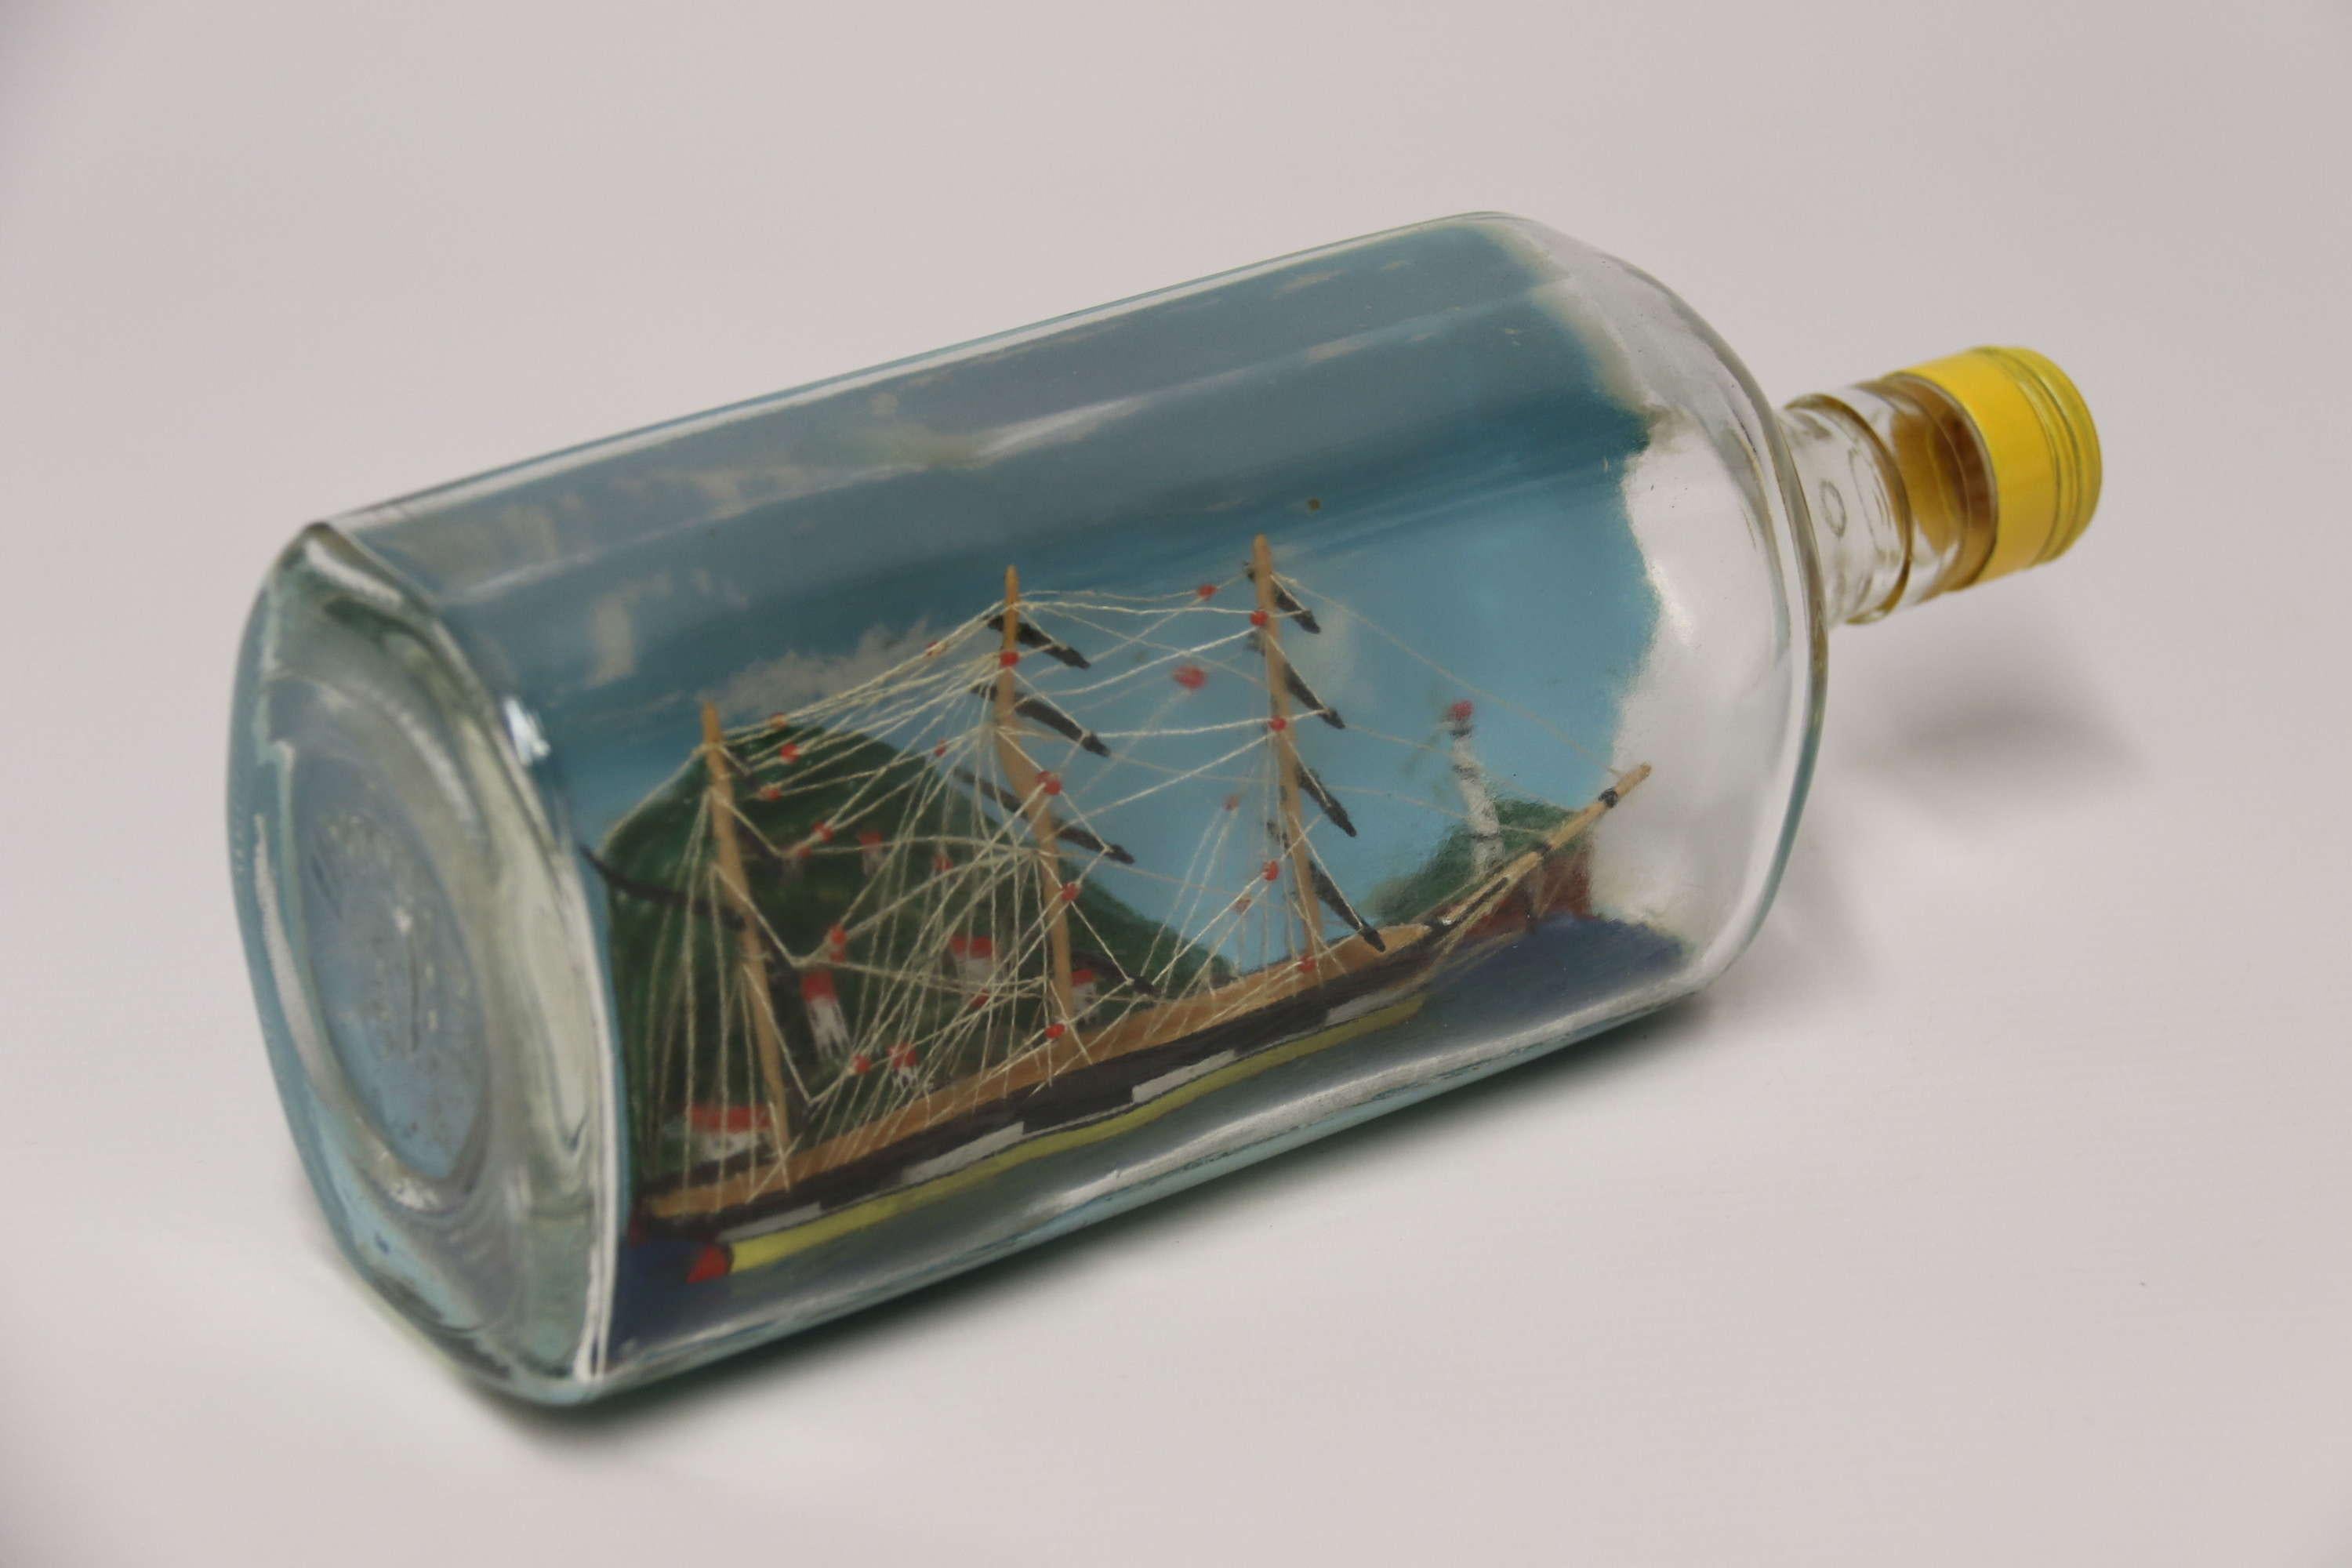 A fine Diorama Folk Art Model ship in a bottle

This skilfully made diorama of a three-mast early 19th century sailing ship at harbour with a raised landscape behind and cottages set into the hillside and opposite there is a small rocky outcrop